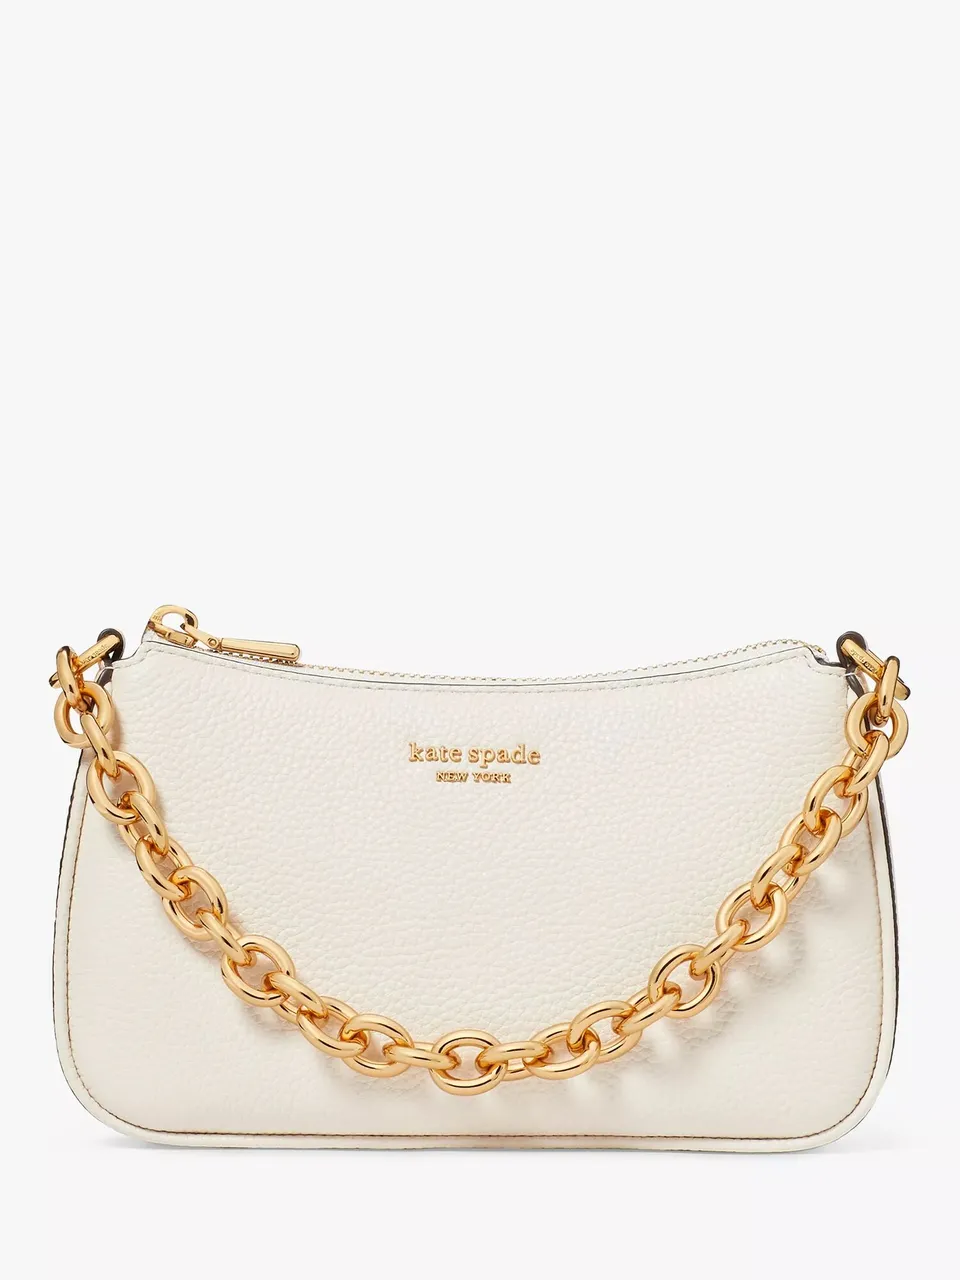 kate spade new york Jolie Pebbled Leather Cross Body Bag - Parchment - Female